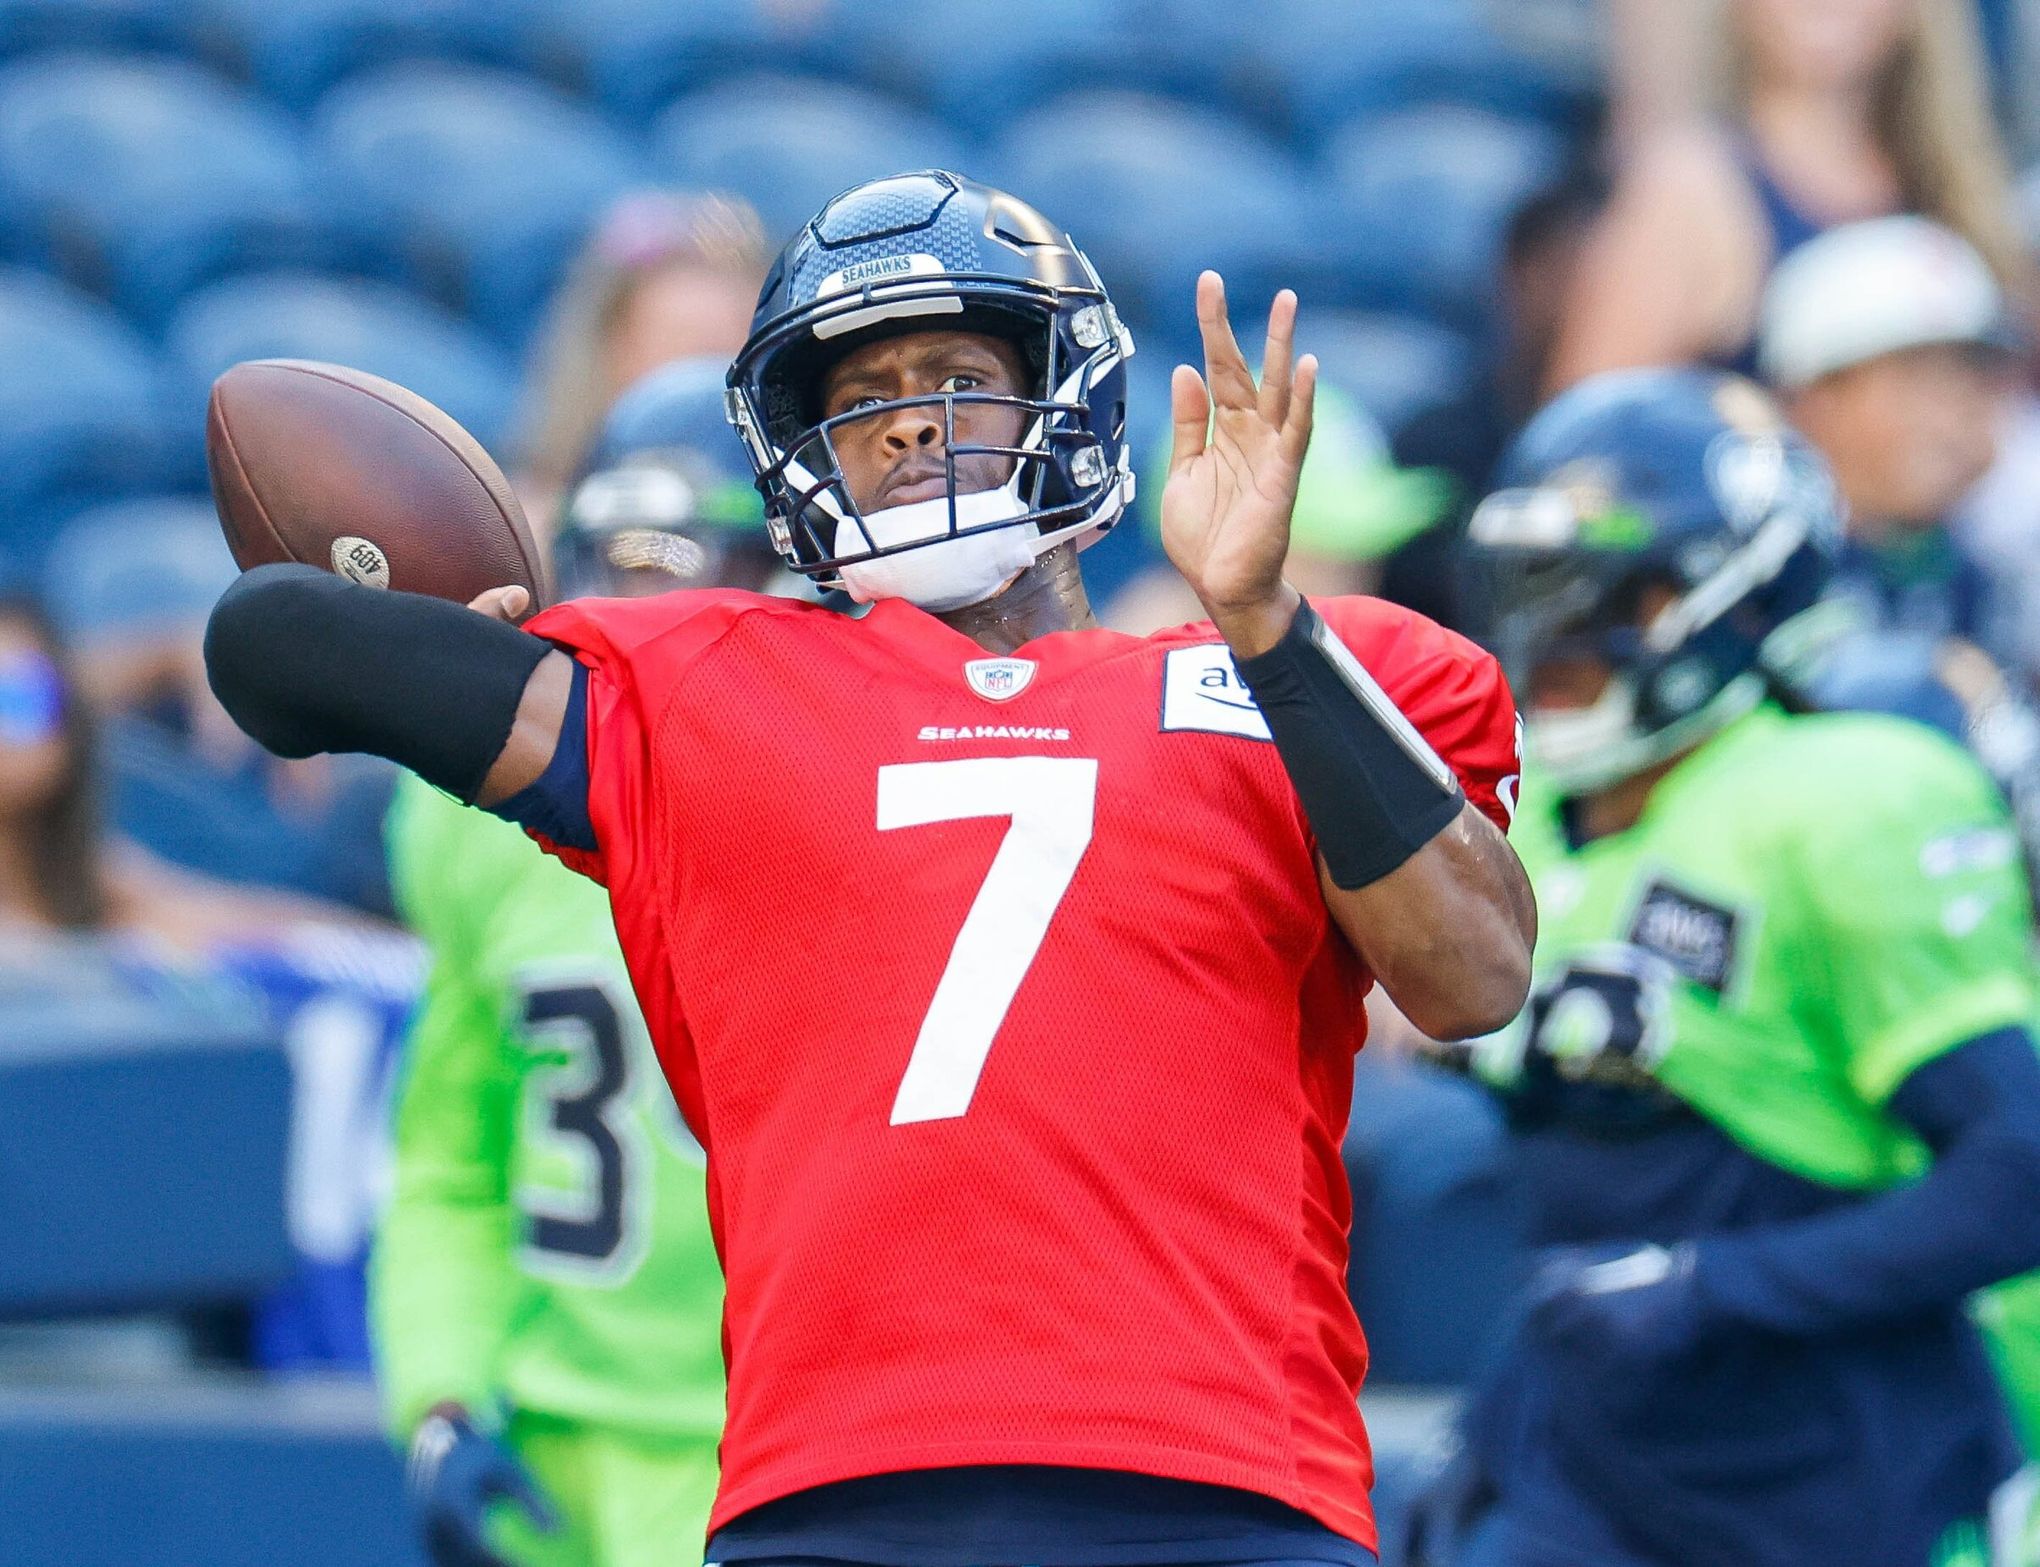 Geno Smith looks good on offense while Boye Mafe tops defense in Seahawks'  mock game